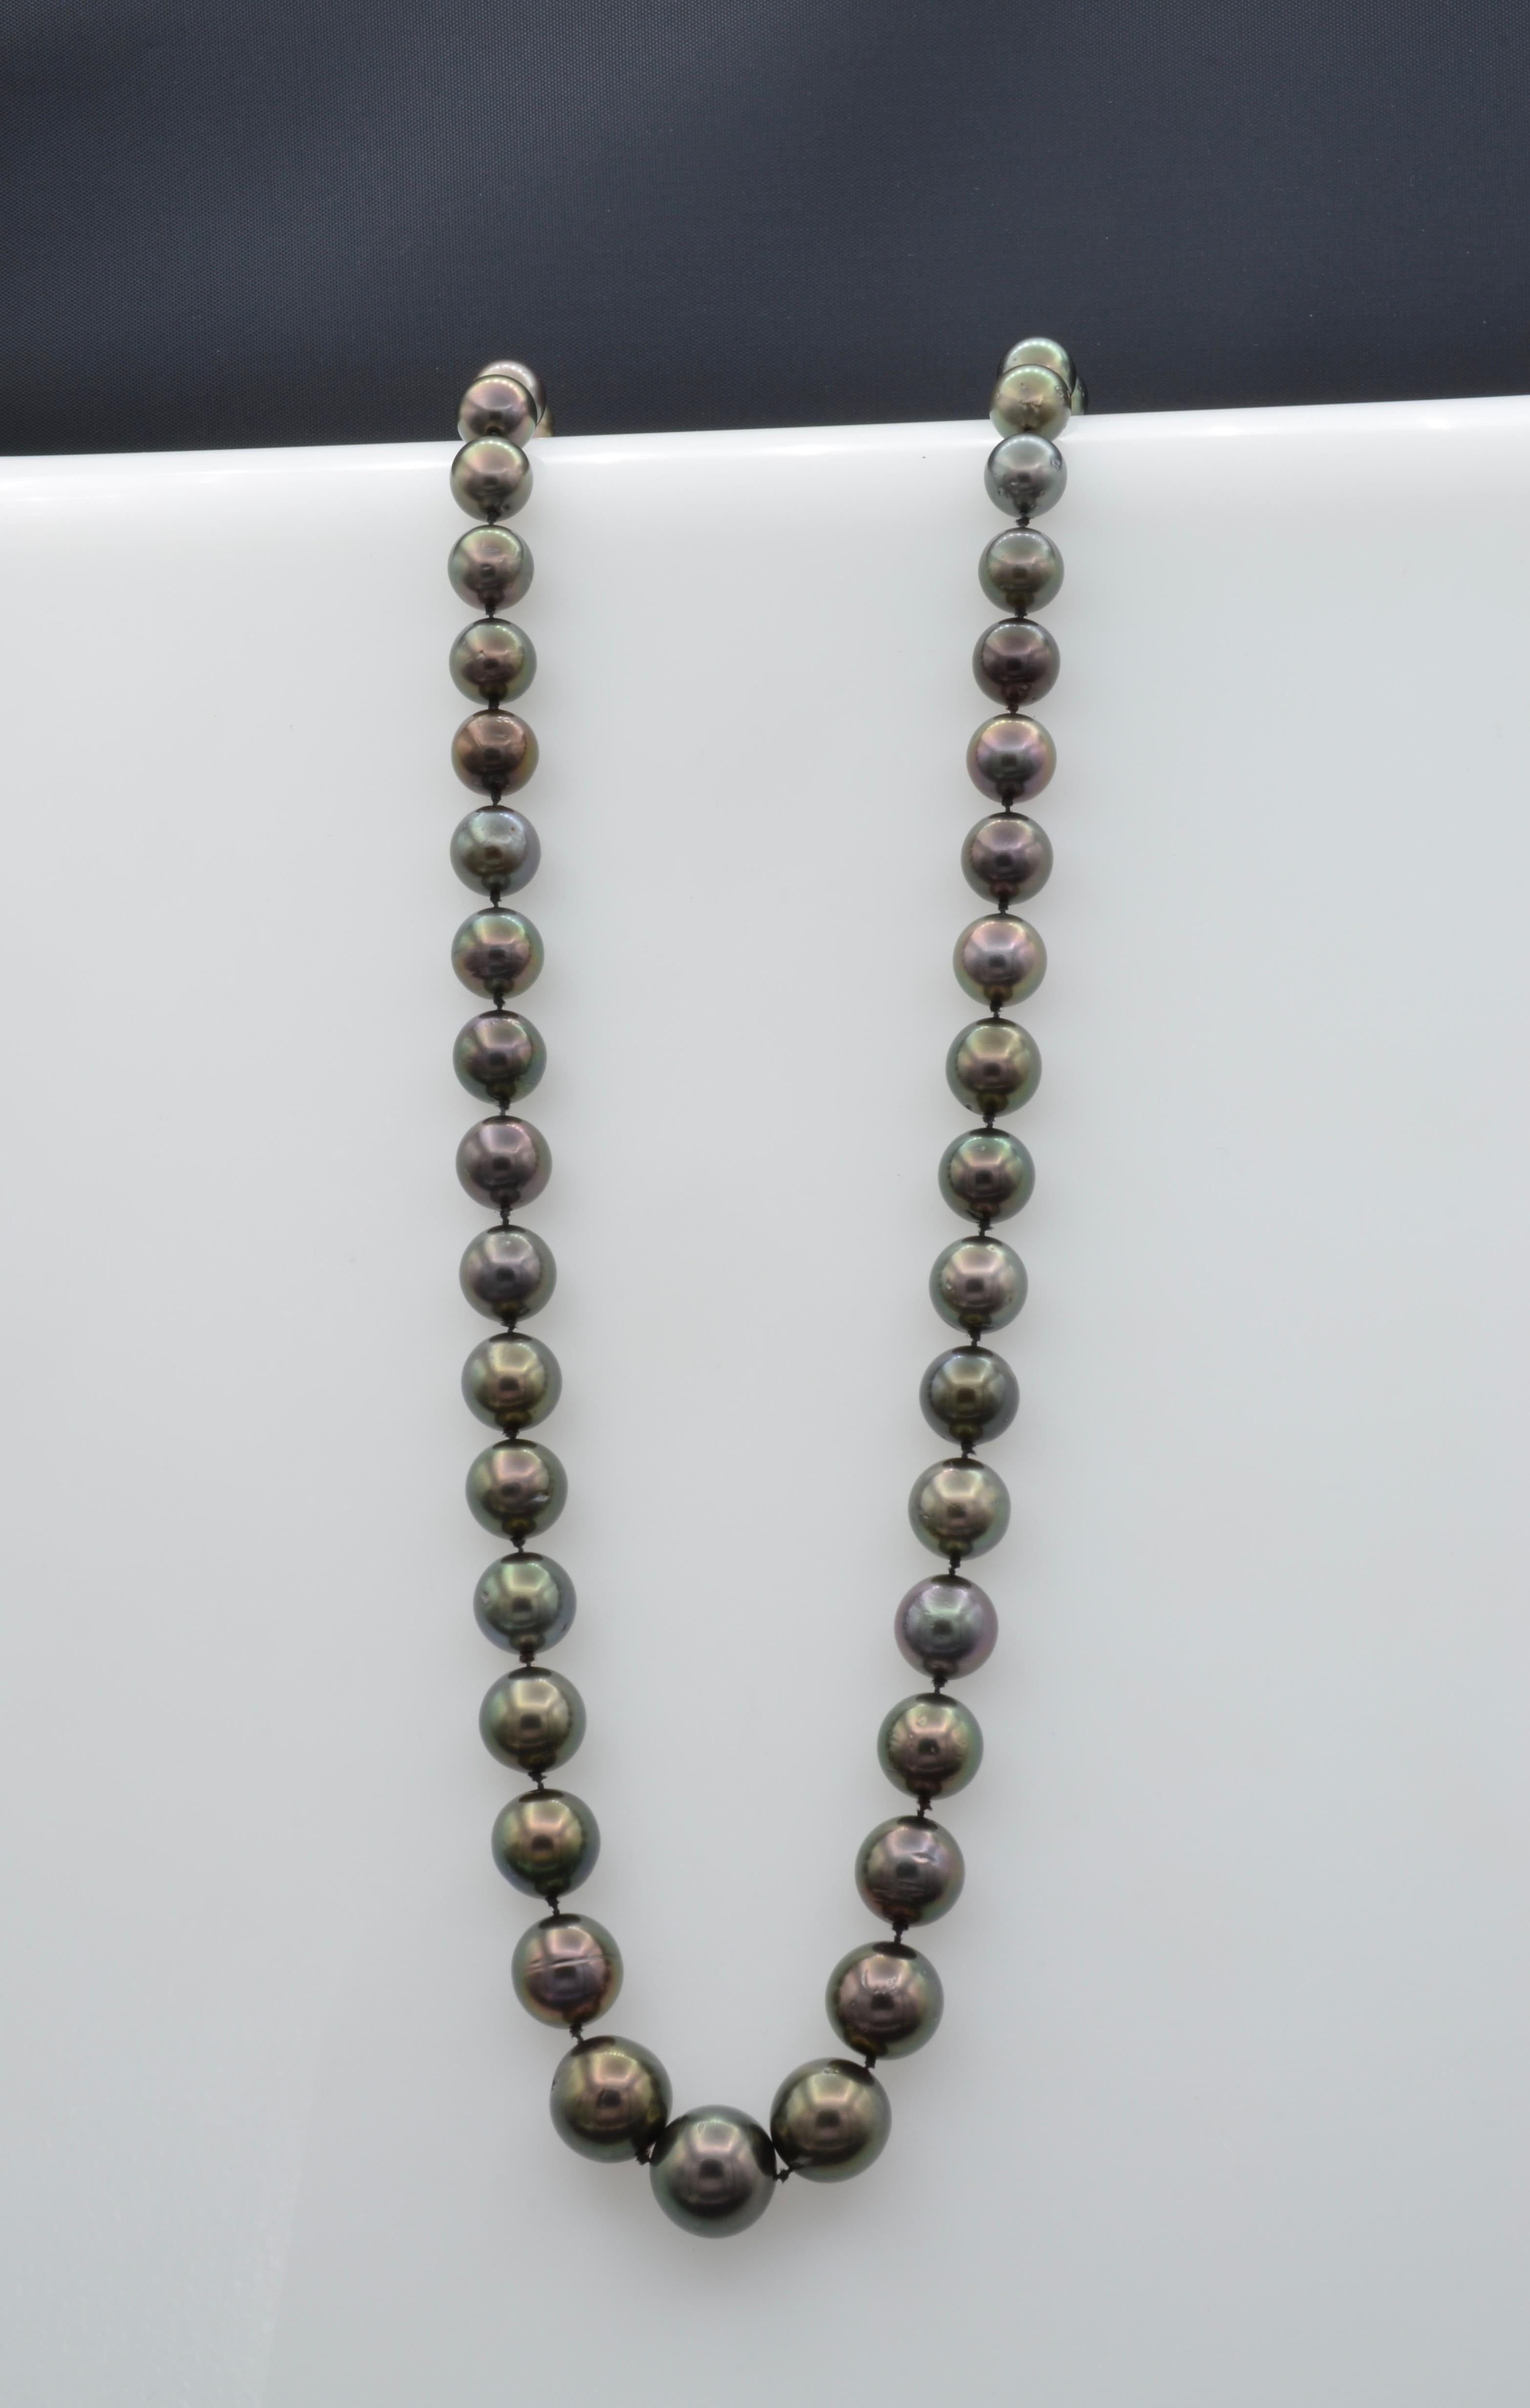 This luminous graduated black Tahitian pearl necklace has a ruby and diamond clasp set in 14k yellow gold. This classic and iconic pearl strand is a collectors dream. All of the pearls are perfectly matched and have a deep luminous rainbow cast. You